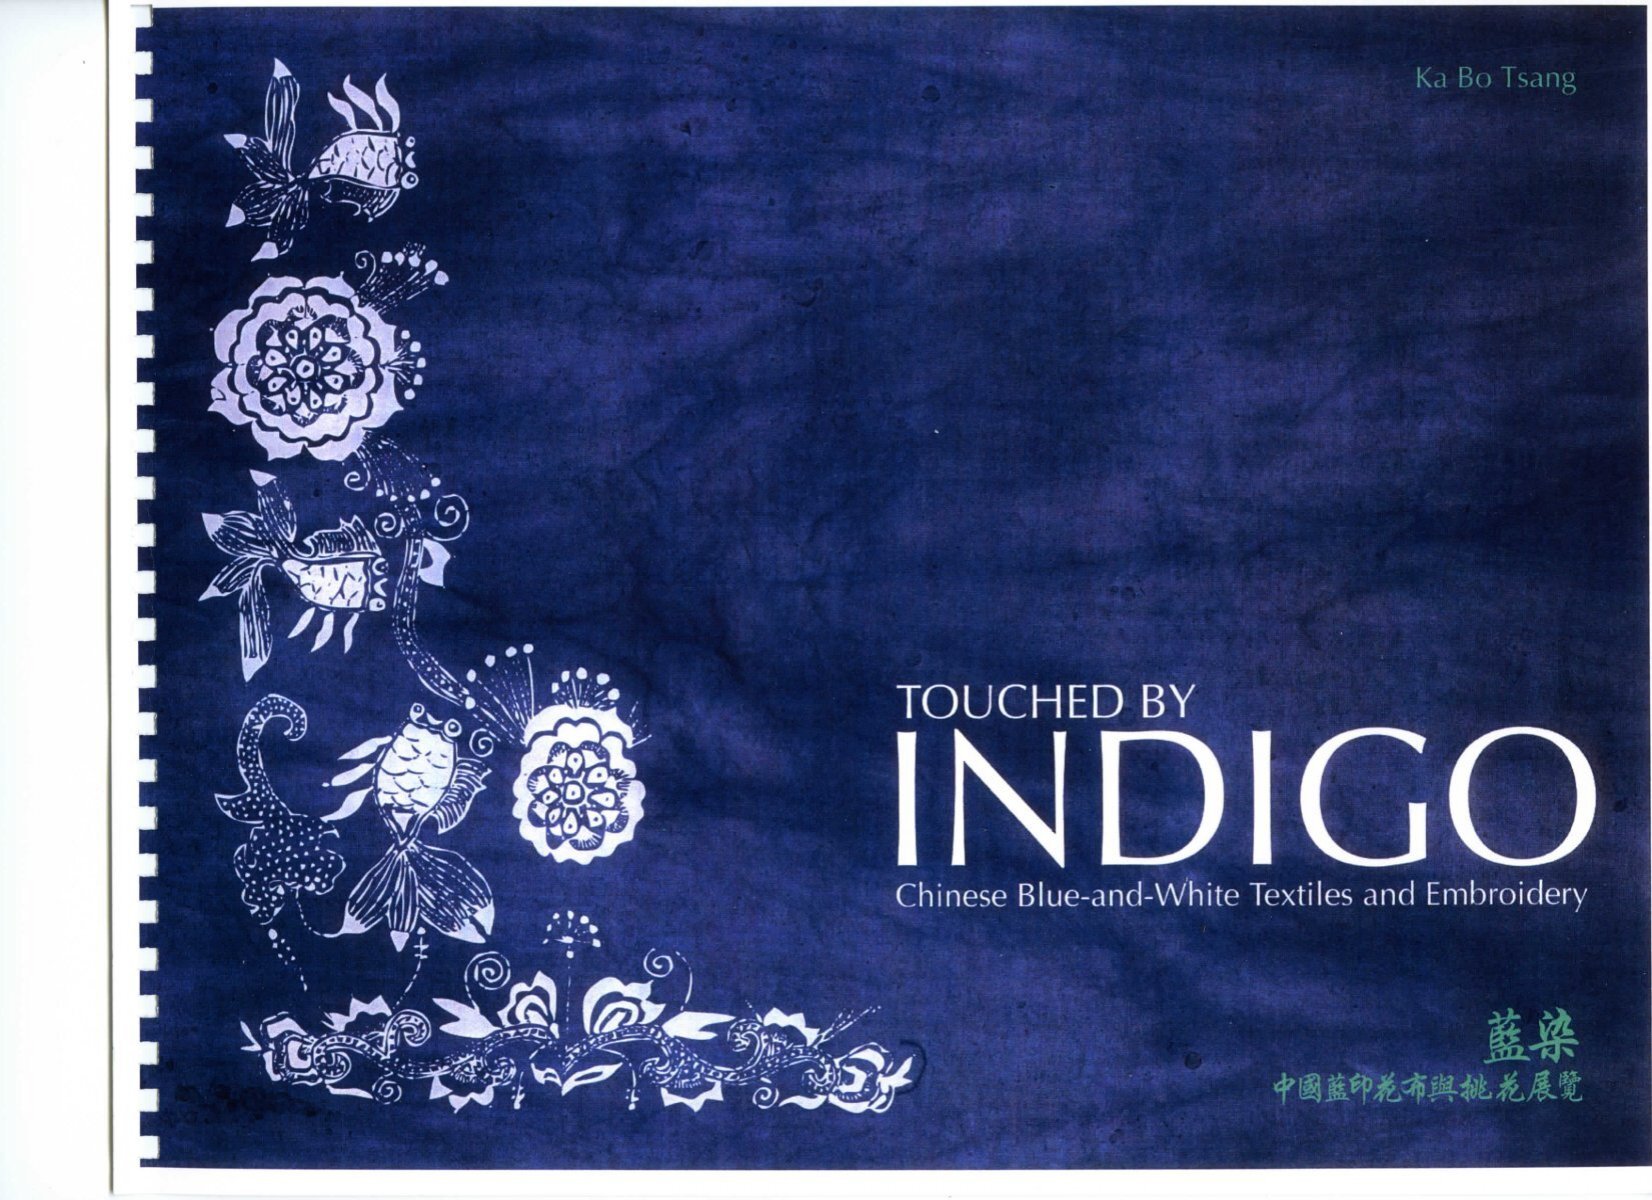 Touched by Indigo - Royal Ontario Museum